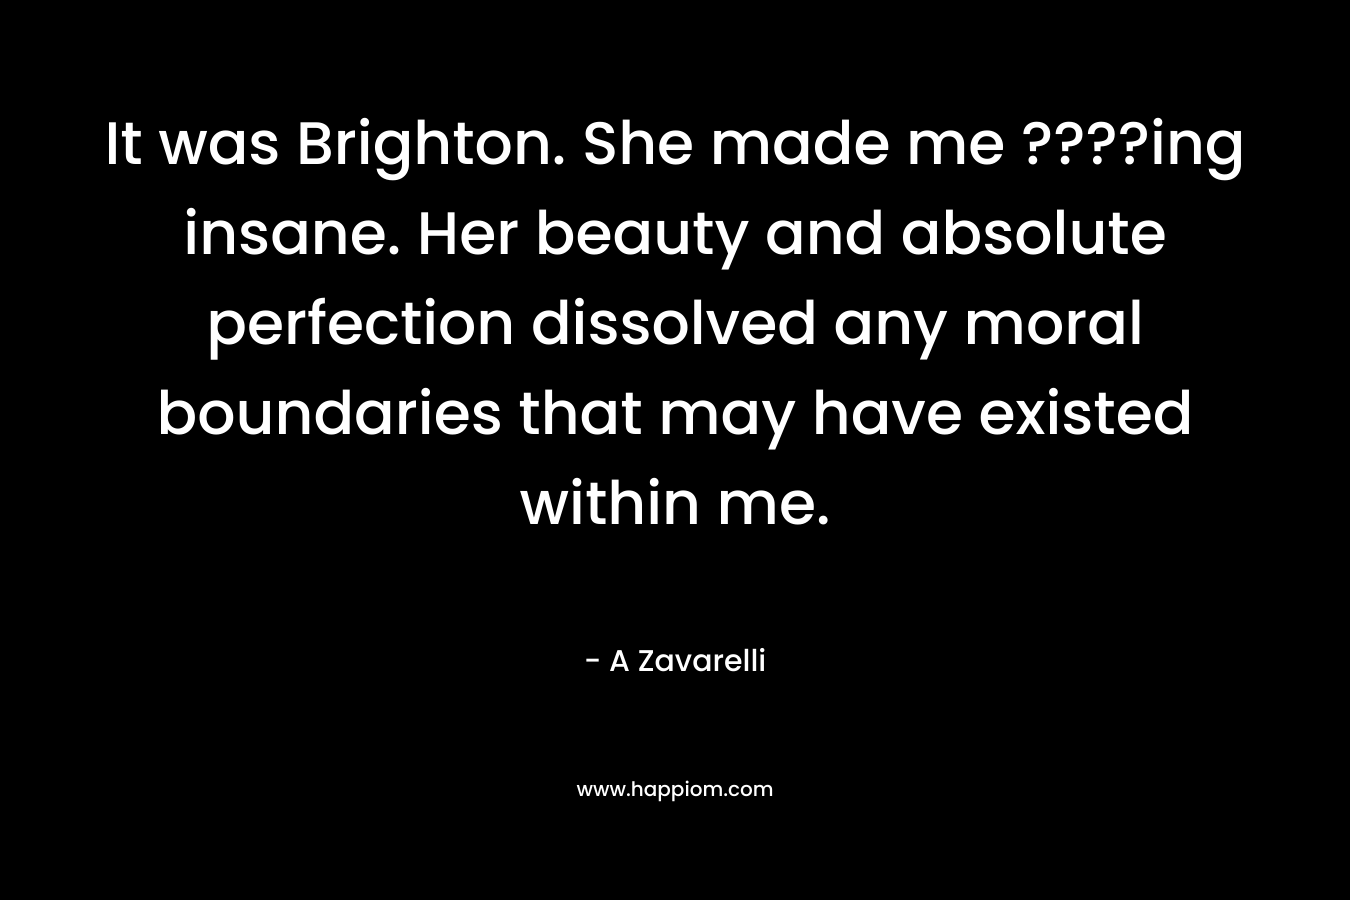 It was Brighton. She made me ????ing insane. Her beauty and absolute perfection dissolved any moral boundaries that may have existed within me.